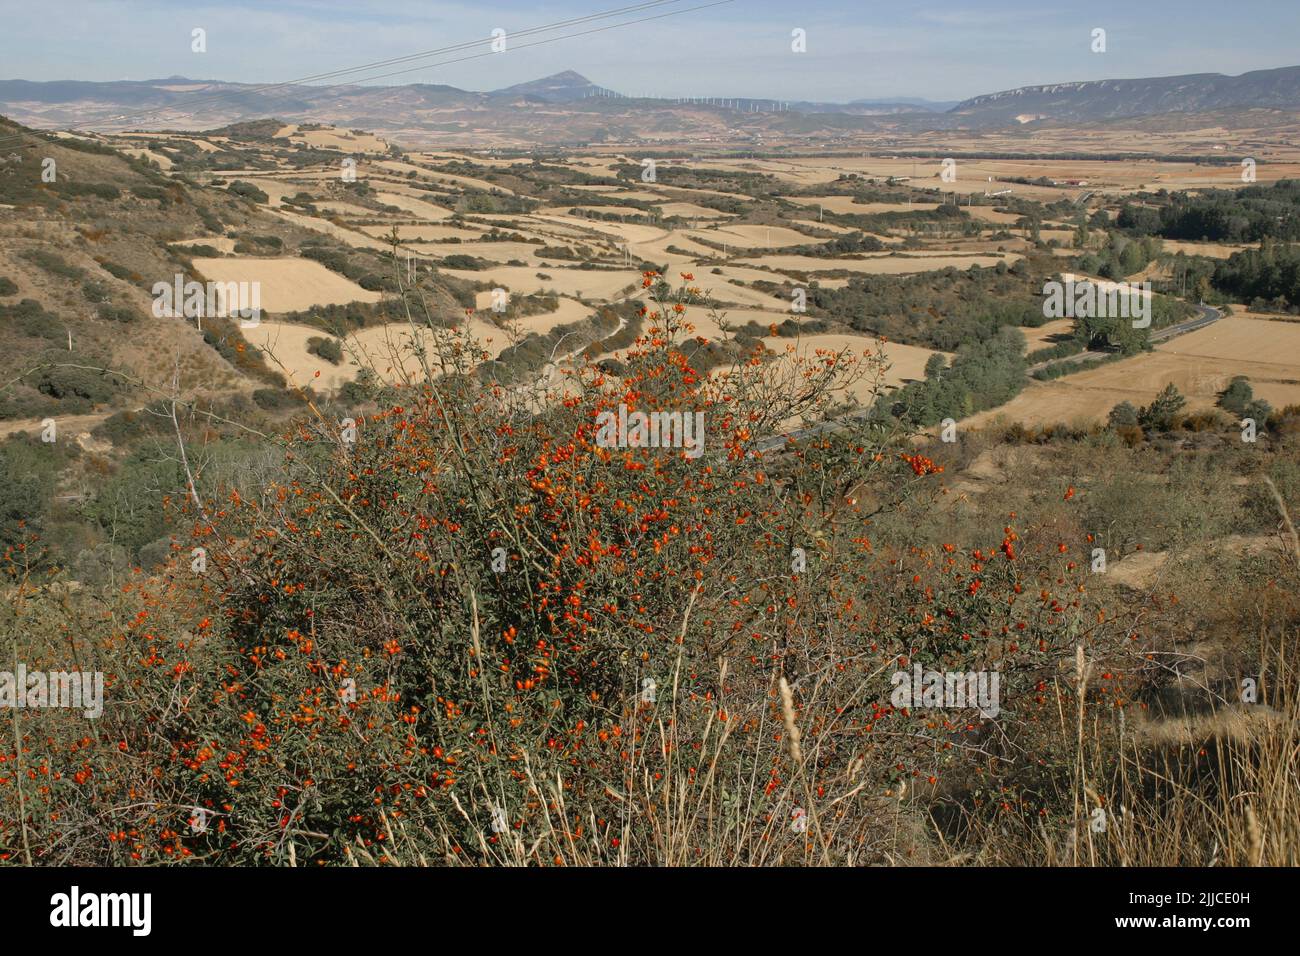 The vast and empty landscape near Sos del Rey Catolico in northern Spain Stock Photo